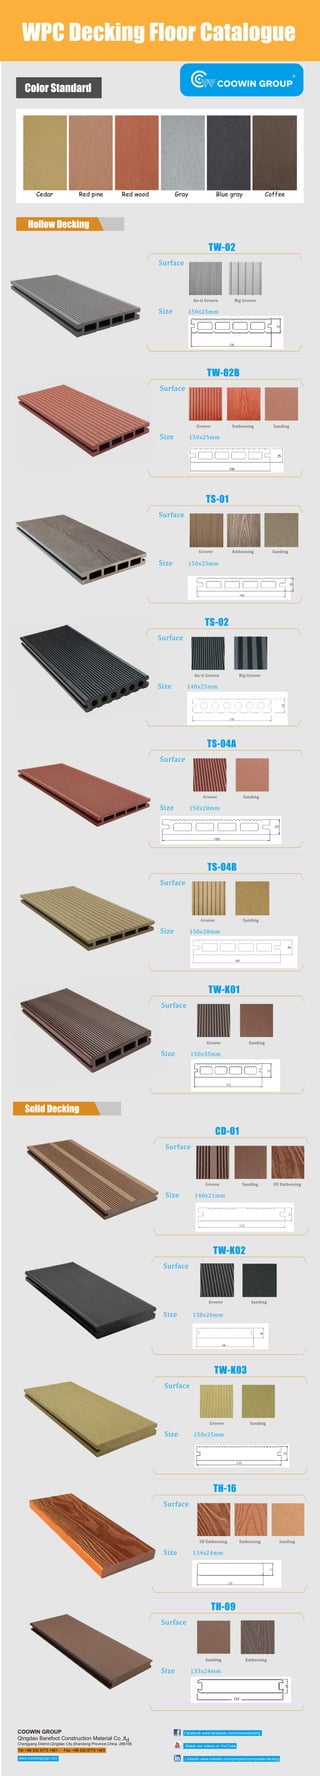 WPC Decking Floor Catalogue
R
Color Standard
Hollow Decking
Solid Decking
TW-02
Surface
Size 150x25mm
An-ti Groove Big Groove
Groove Embossing Sanding
TW-02B
Surface
Size 150x25mm
TS-01
Surface
Size 150x25mm
Groove Embossing Sanding
TS-02
Surface
Size 140x25mm
An-ti Groove Big Groove
CD-01
Surface
Size 140x21mm
Groove Sanding 3D Embossing
TS-04A
Surface
Size 150x20mm
Groove Sanding
TS-04B
Surface
Size 150x20mm
Groove Sanding
TW-K01
Surface
Size 150x35mm
Groove Sanding
TW-K02
Surface
Size 138x26mm
Groove Sanding
TW-K03
Surface
Size 150x25mm
Groove Sanding
TH-16
Surface
Size 134x24mm
3D Embossing Embossing Sanding
TH-09
Surface
Size 133x24mm
Sanding Embossing
COOWIN GROUP
Qingdao Barefoot Construction Material Co.,ltd
Chengyang District,Qingdao City,Shandong Province,China. 266108
Tel: +86 532 6773 1461 Fax: +86 532 6773 1463
24-hours hotline: 0086 189 5424 8234www.coowingroup.com
Facebook www.facebook.com/coowindecking
Watch our videos on YouTube
Linkedin www.linkedin.com/company/composite-deckingwww.coowingroup.com
 